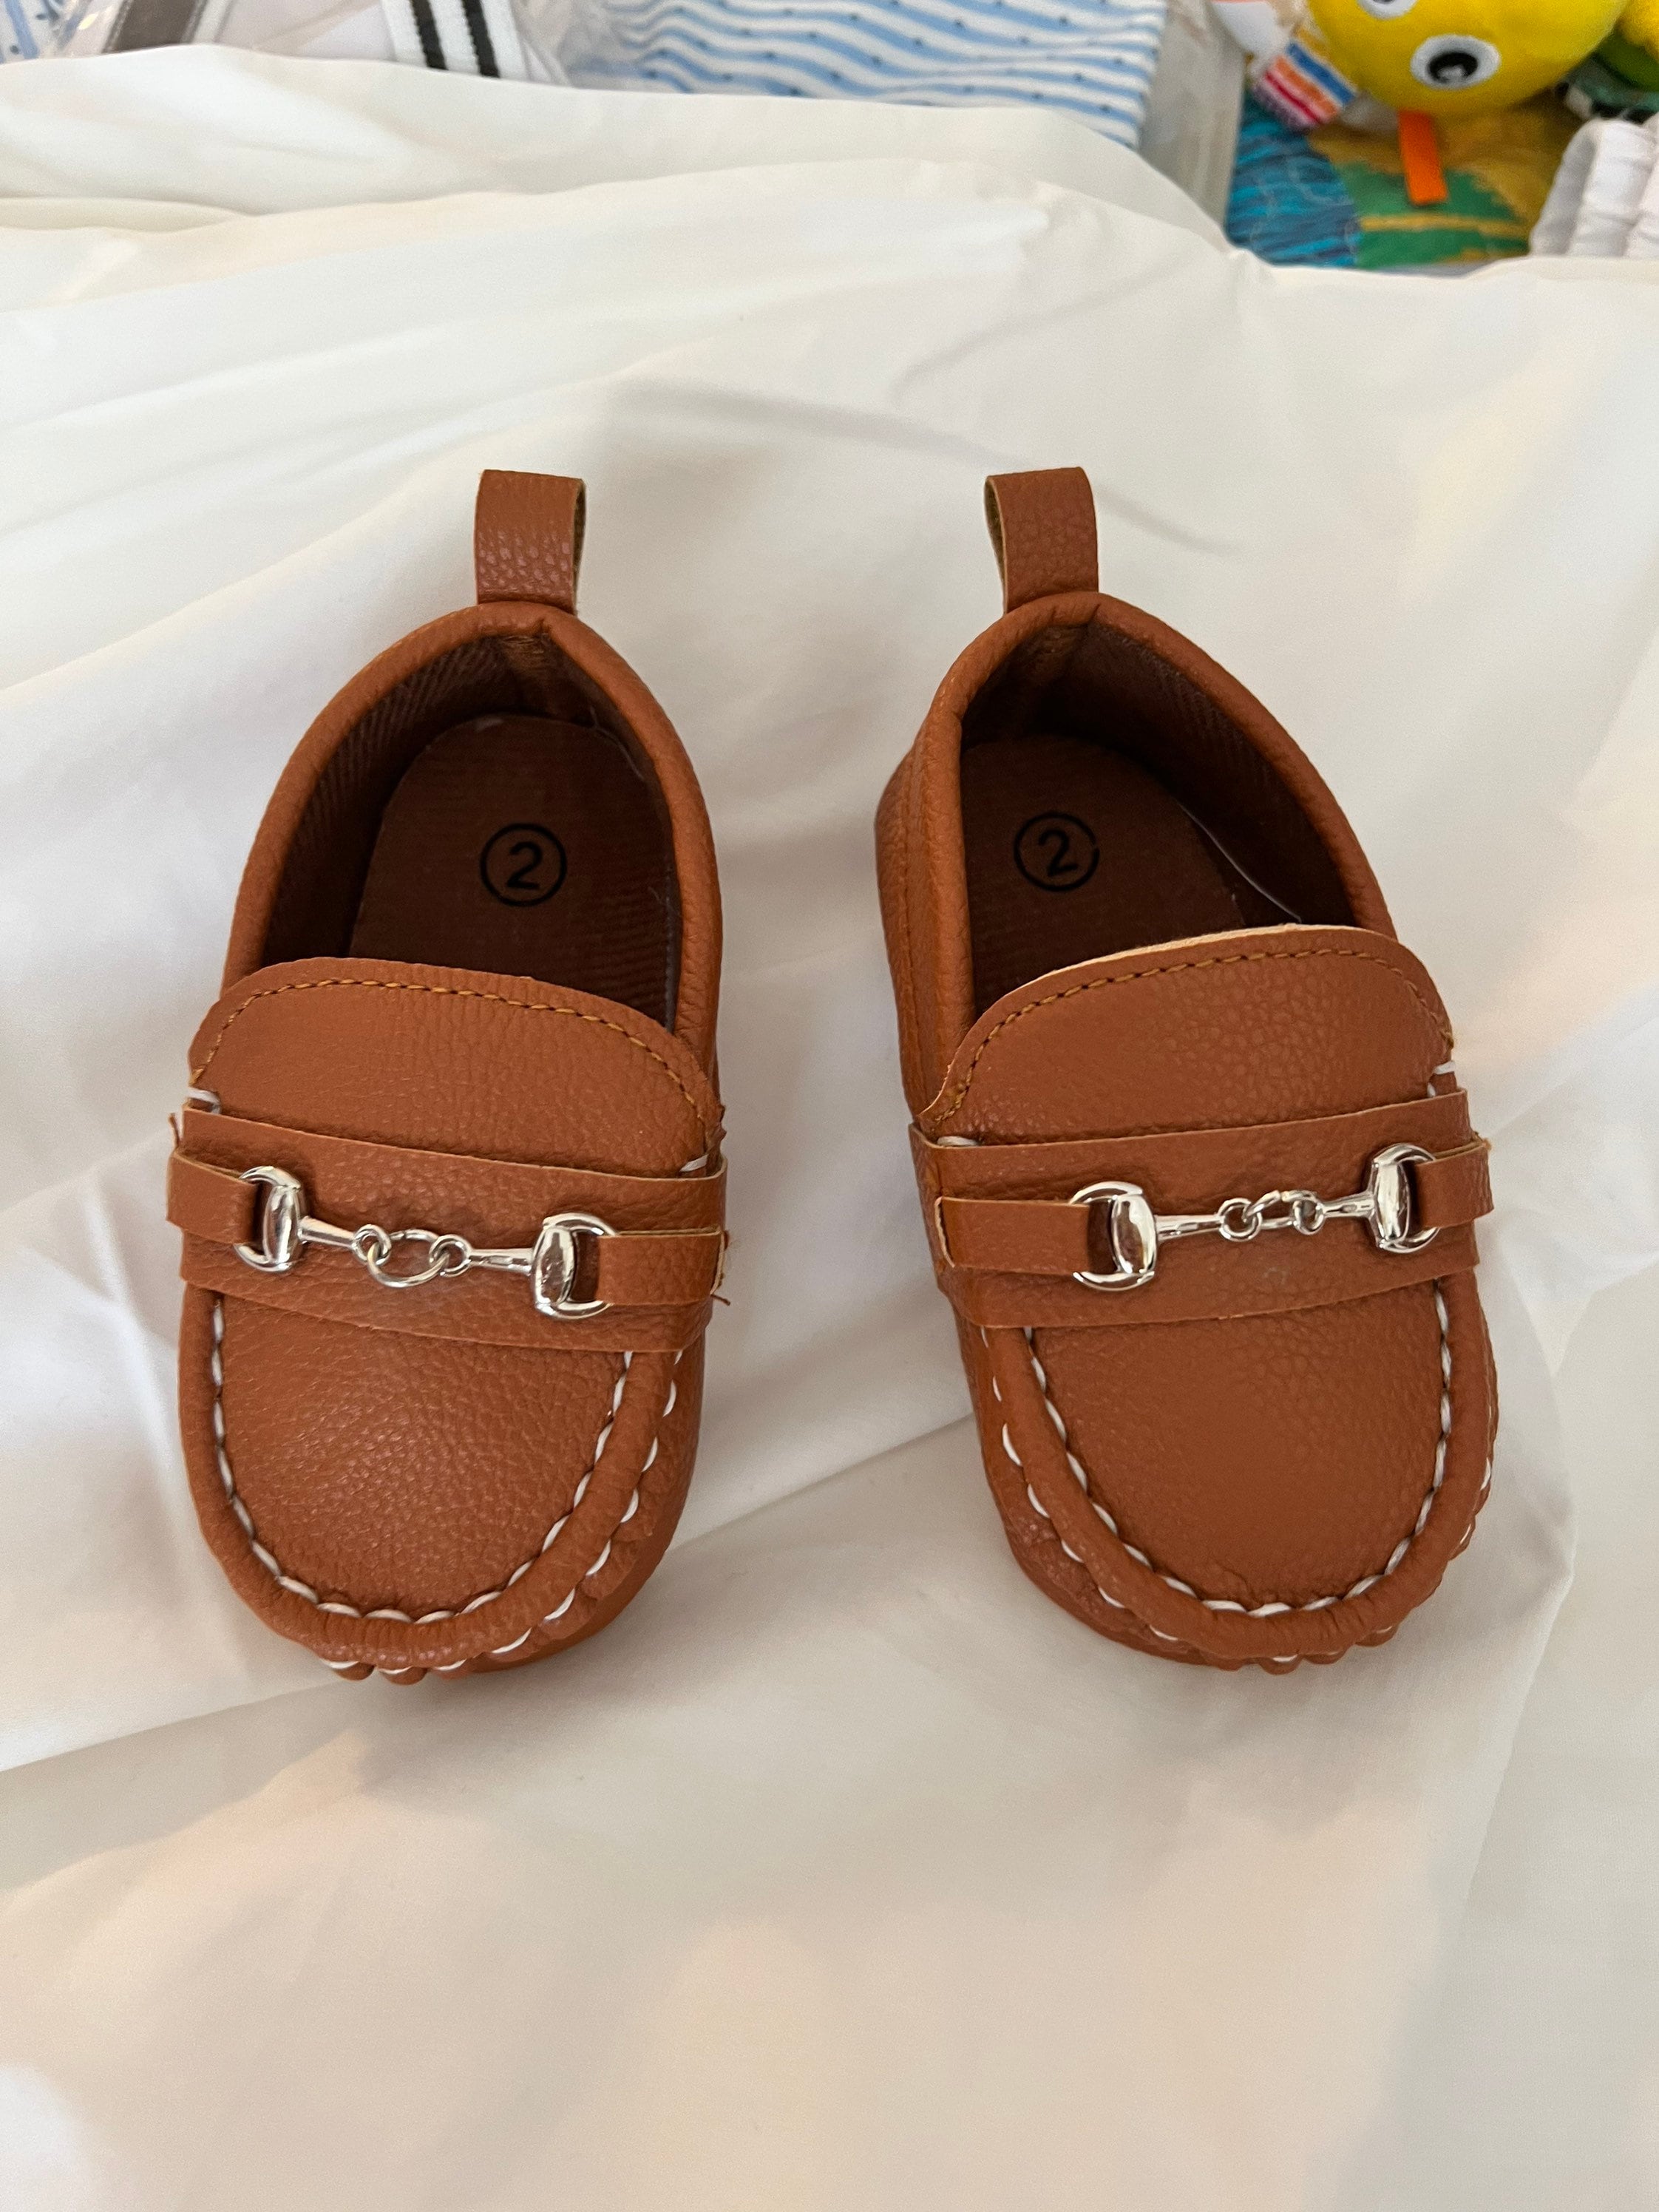 Baby Shoes - Boys Moccasin Loafers -  Tan.